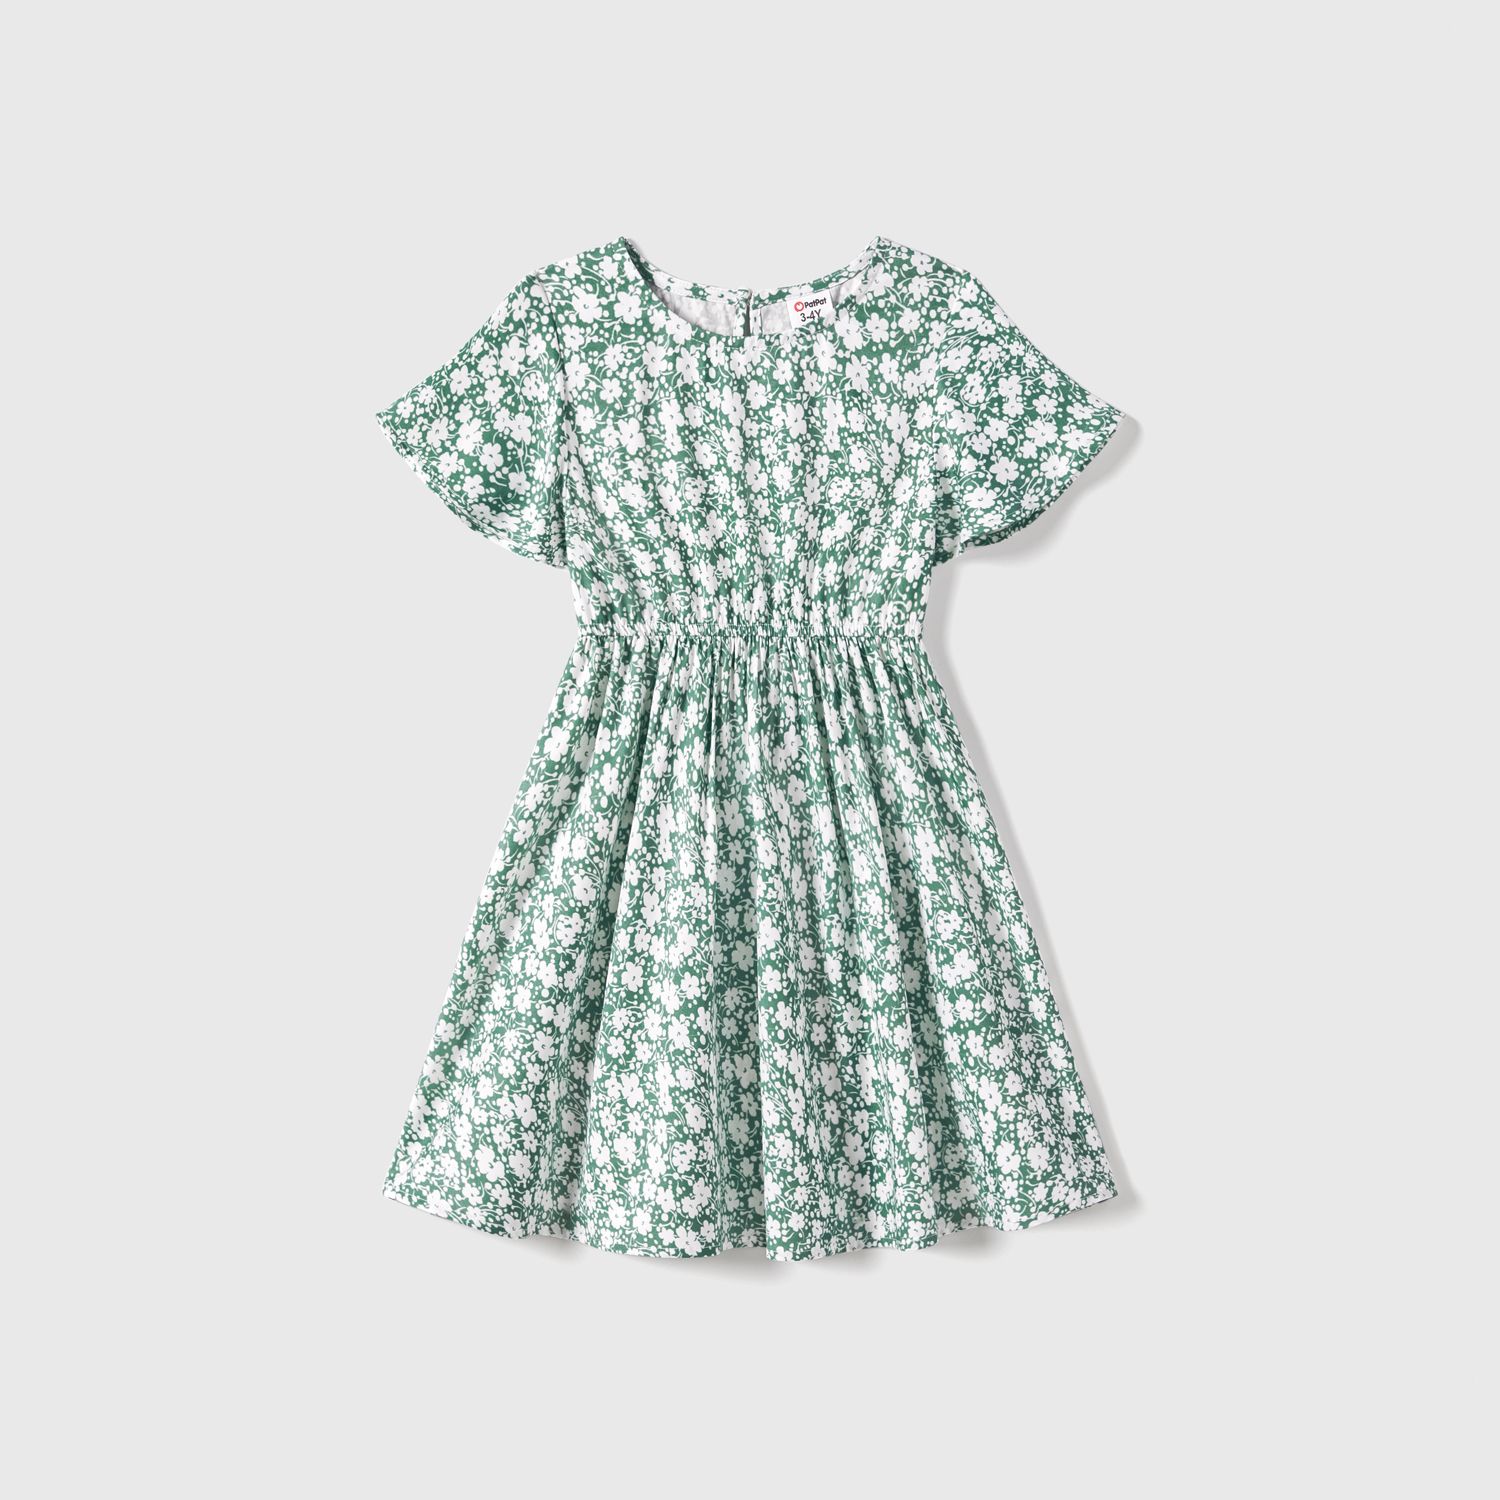 Family Matching Allover Floral Print Short-sleeve Dresses And Color Block Tops Sets